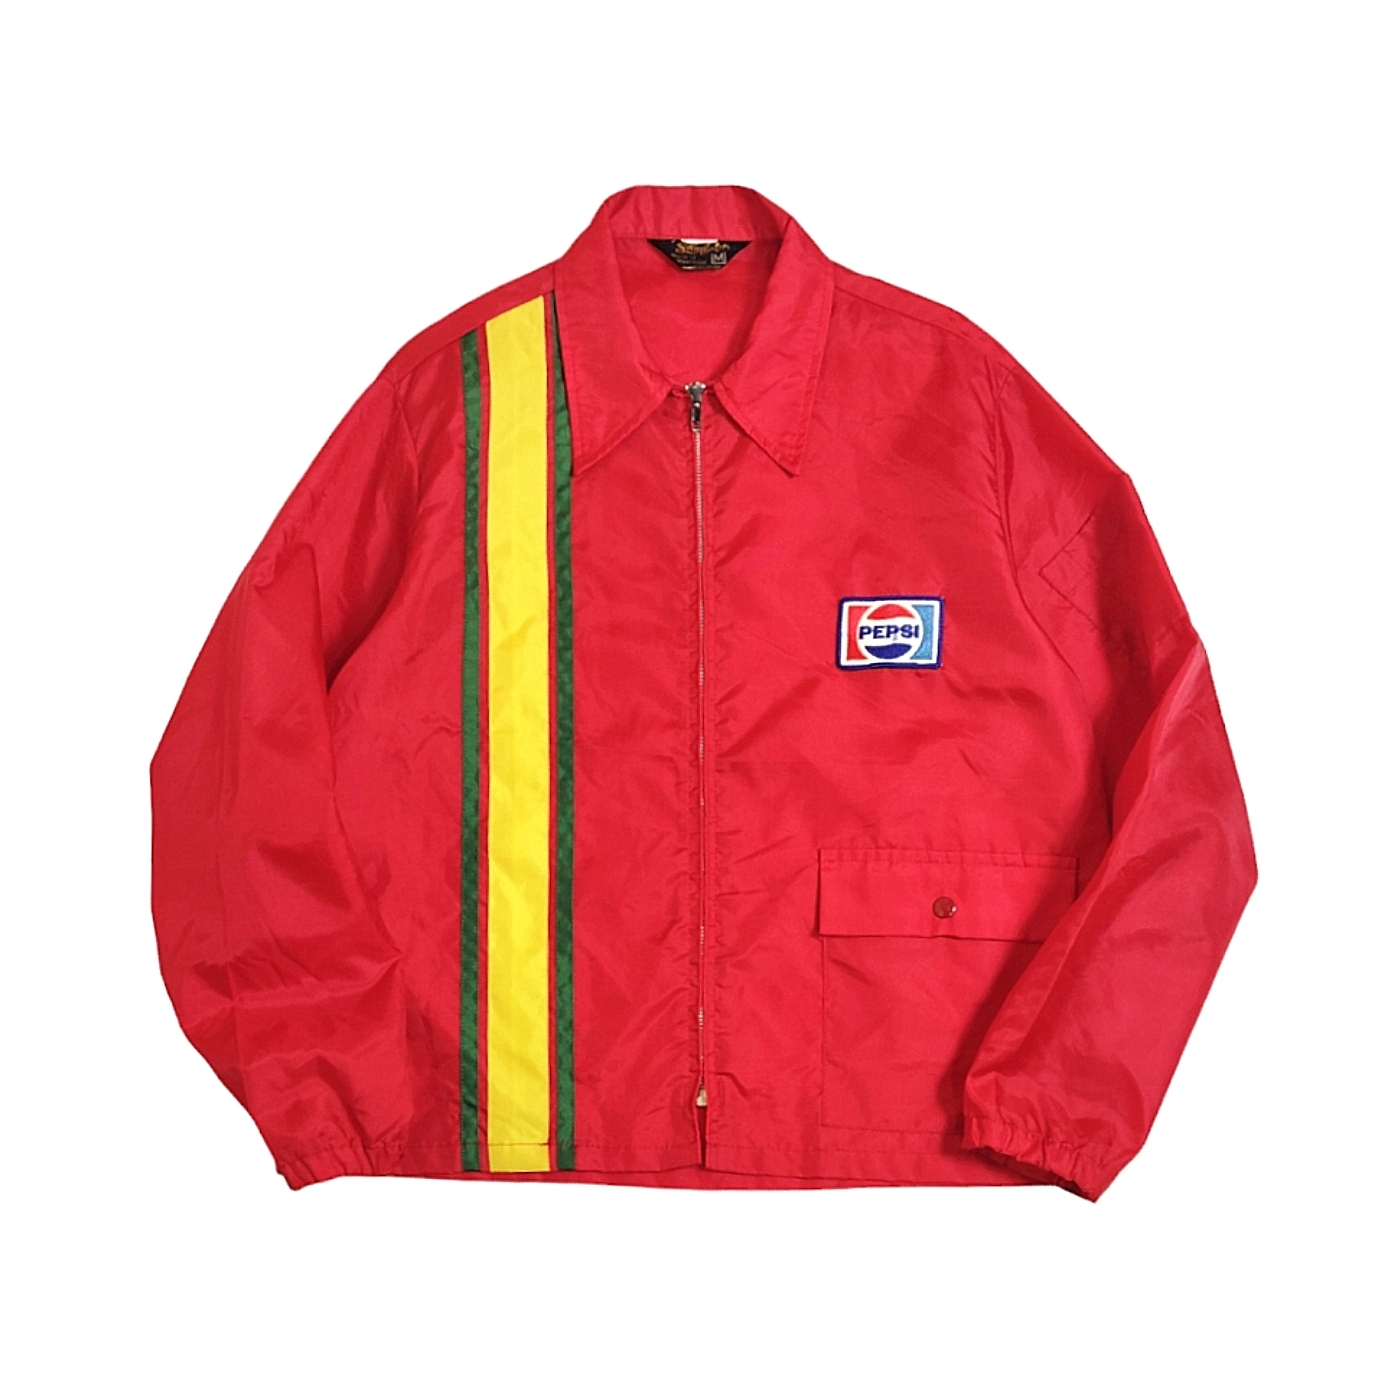 Swingster / Zip up Nylon Racing Jacket with Patch | Vintage.City